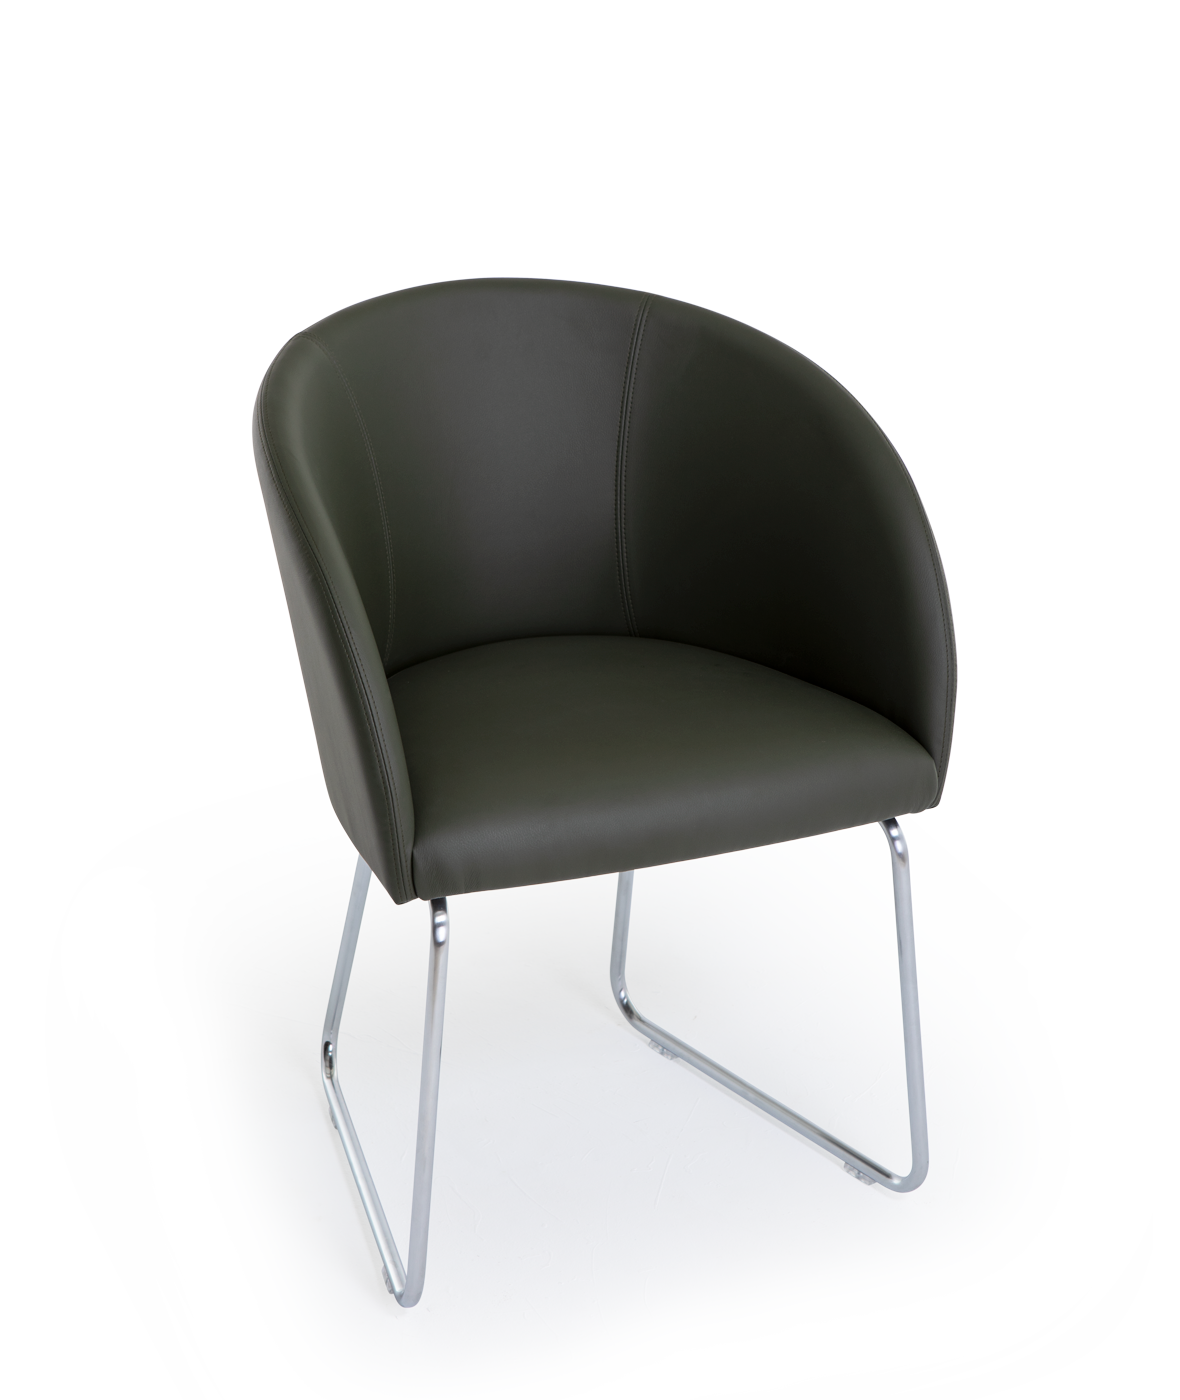 Vergés - Cistell Original chair with armrests and sled base